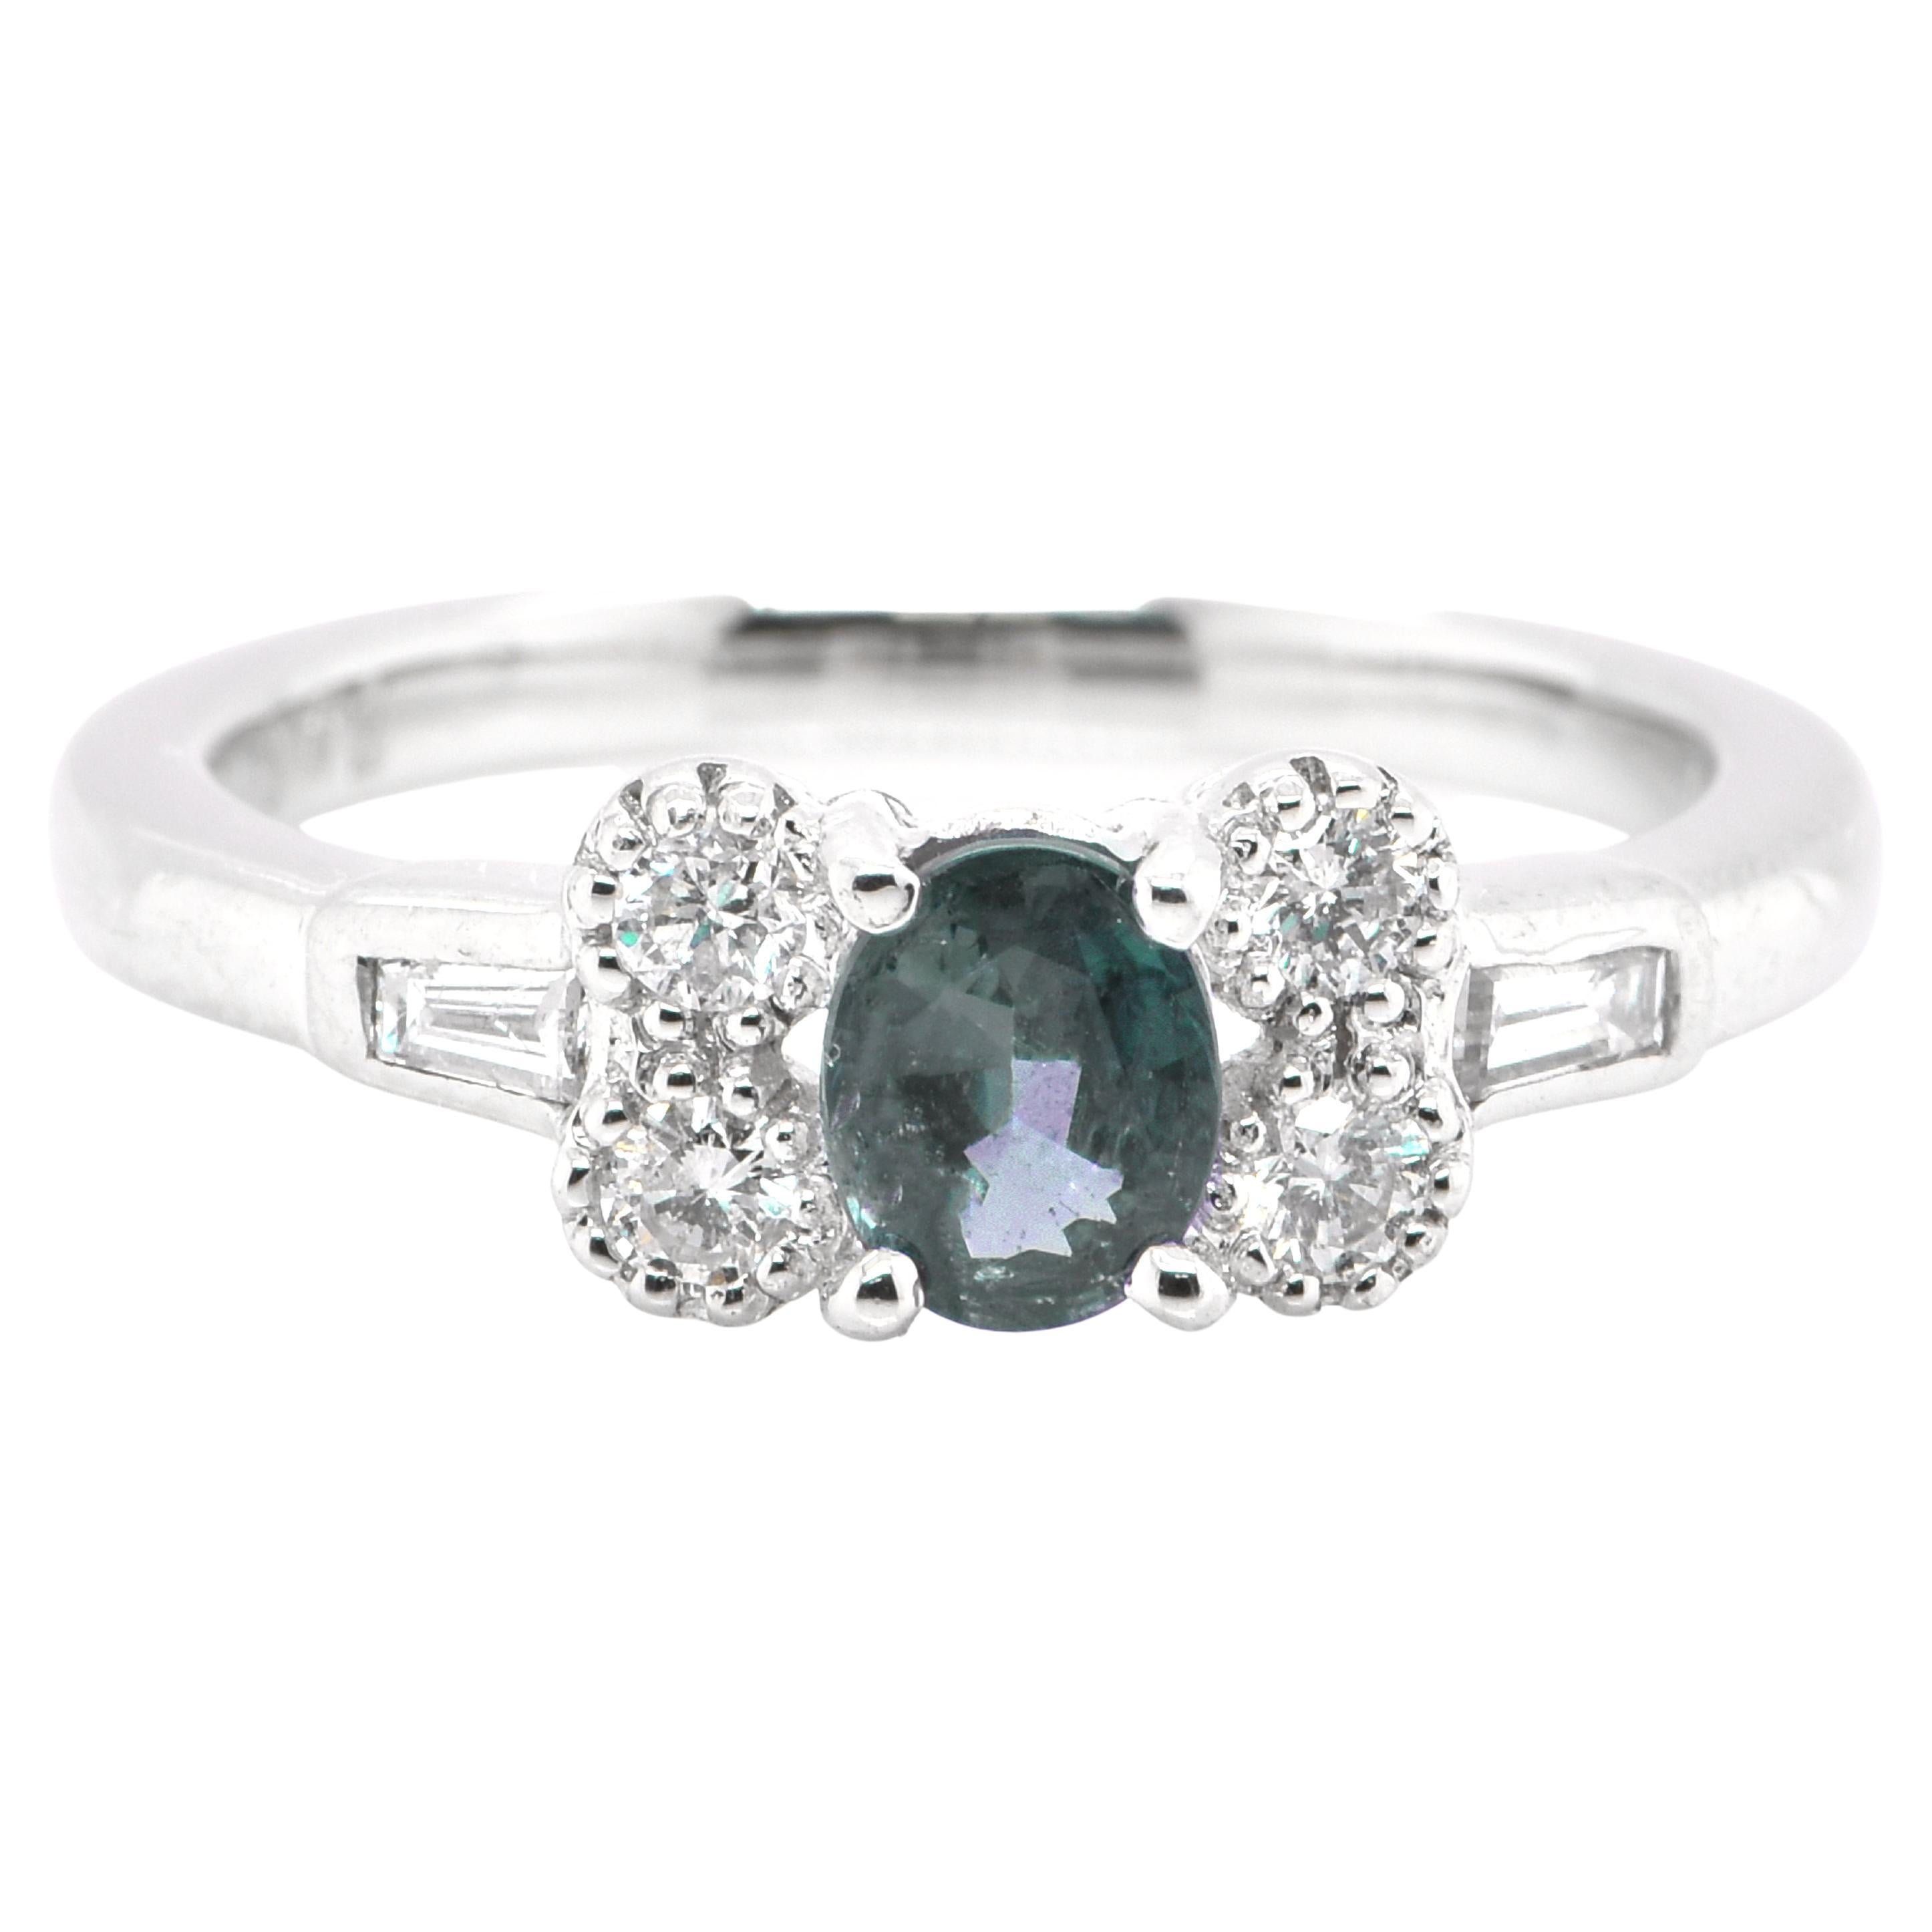 0.42 Carat Natural Color-Changing Alexandrite and Diamond Ring Set in Platinum